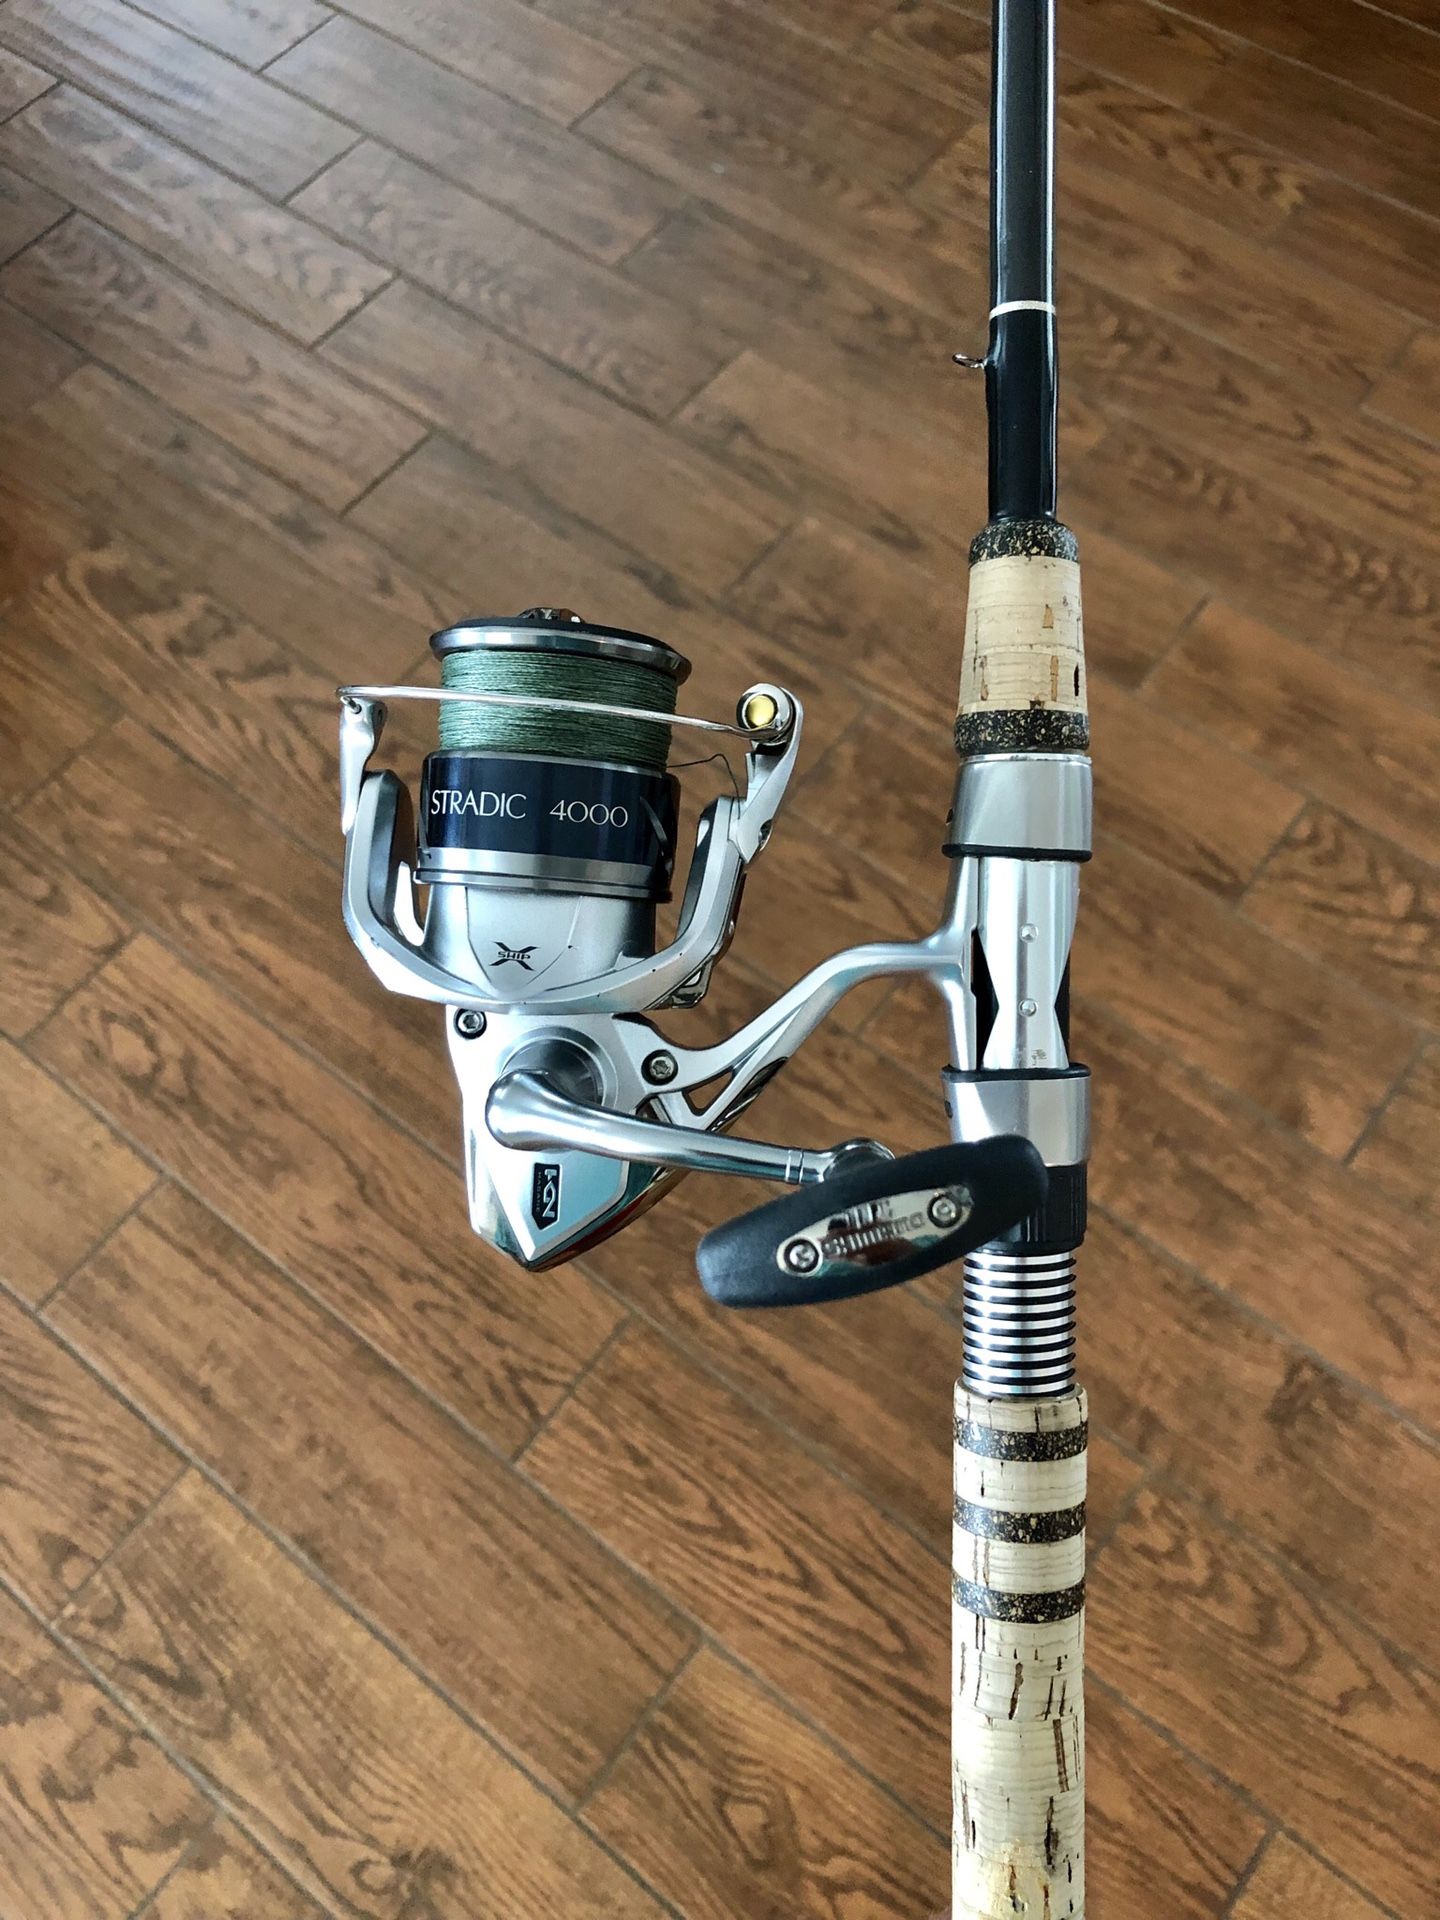 Shimano Stradic 4000 fk on star rod seagis 7'6” fishing rod for Sale in  Palm Harbor, FL - OfferUp